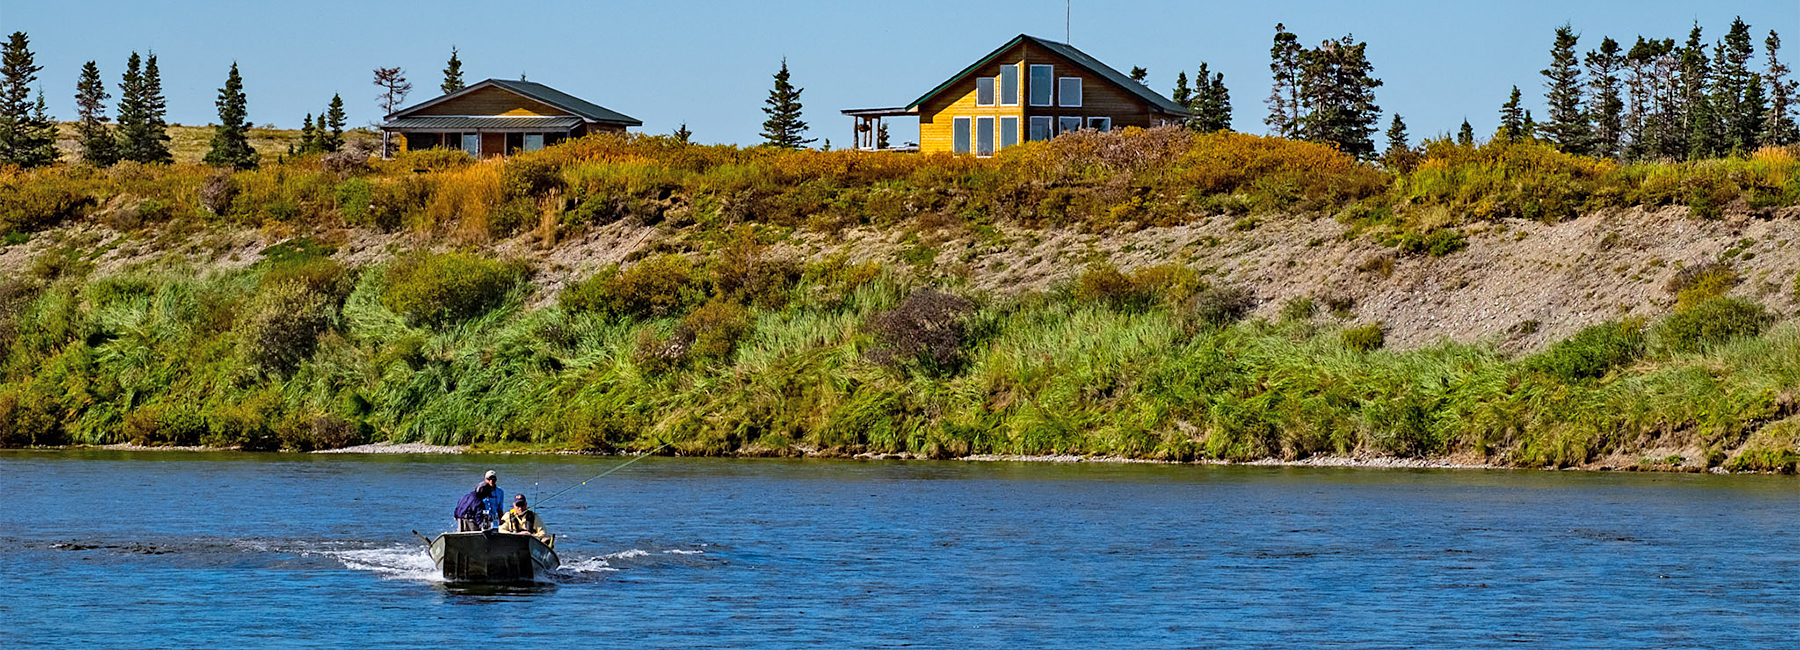 Best Alaska Fly Fishing Lodges for 2021 The Fly Shop